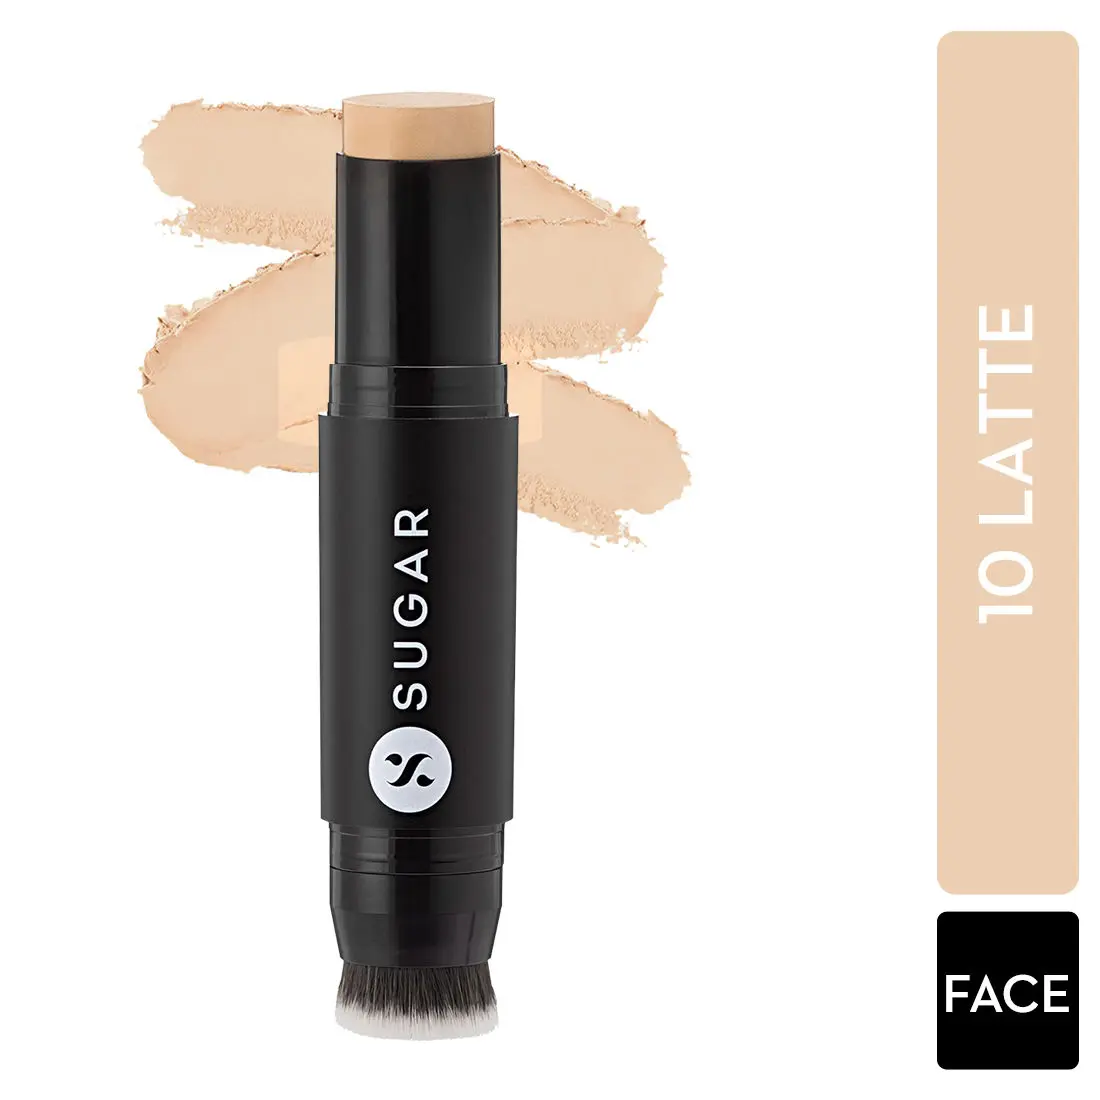 SUGAR Cosmetics - Ace Of Face - Foundation Stick - 10 Latte (Light Foundation with Warm Undertone) - Waterproof, Full Coverage Foundation for Women with Inbuilt Brush